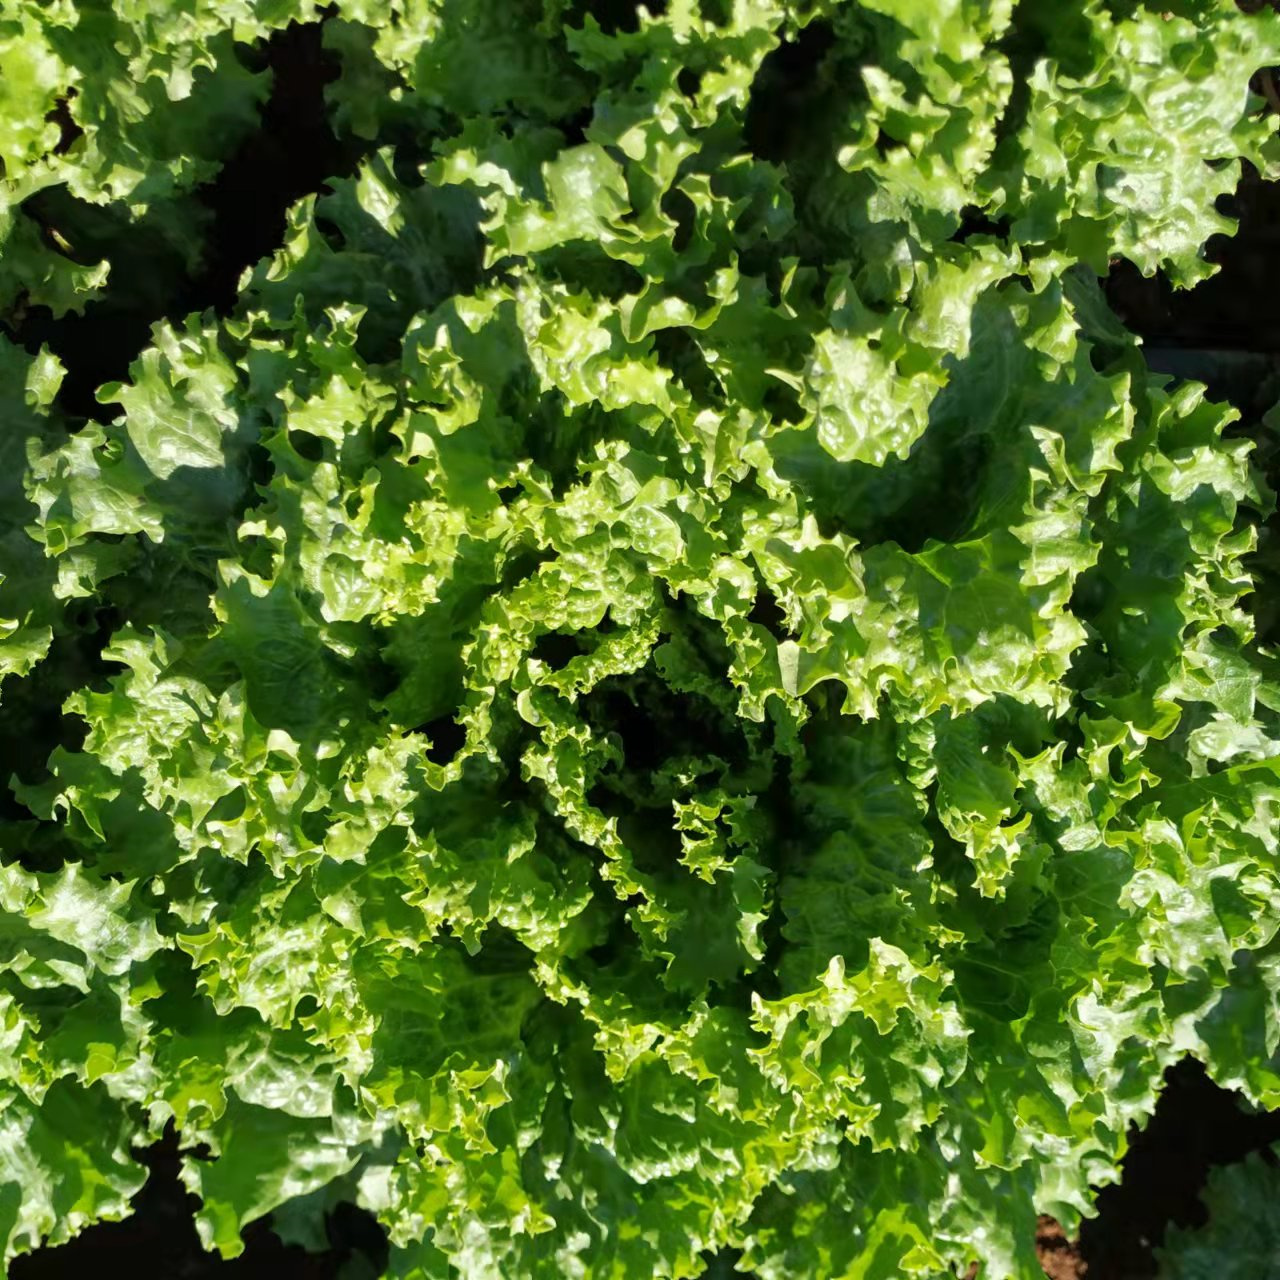 High Quality Green Lettuce Seeds for Planting-American Fast Growing